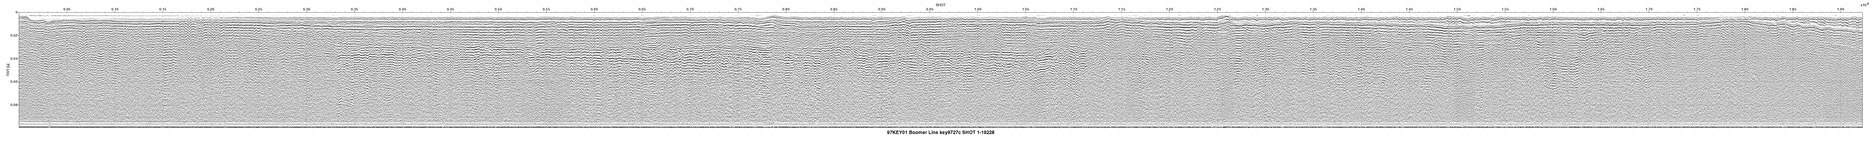 Thumbnail GIF image of the seismic trackline key9727c, with a hotlink to the more detailed, larger JPG image.